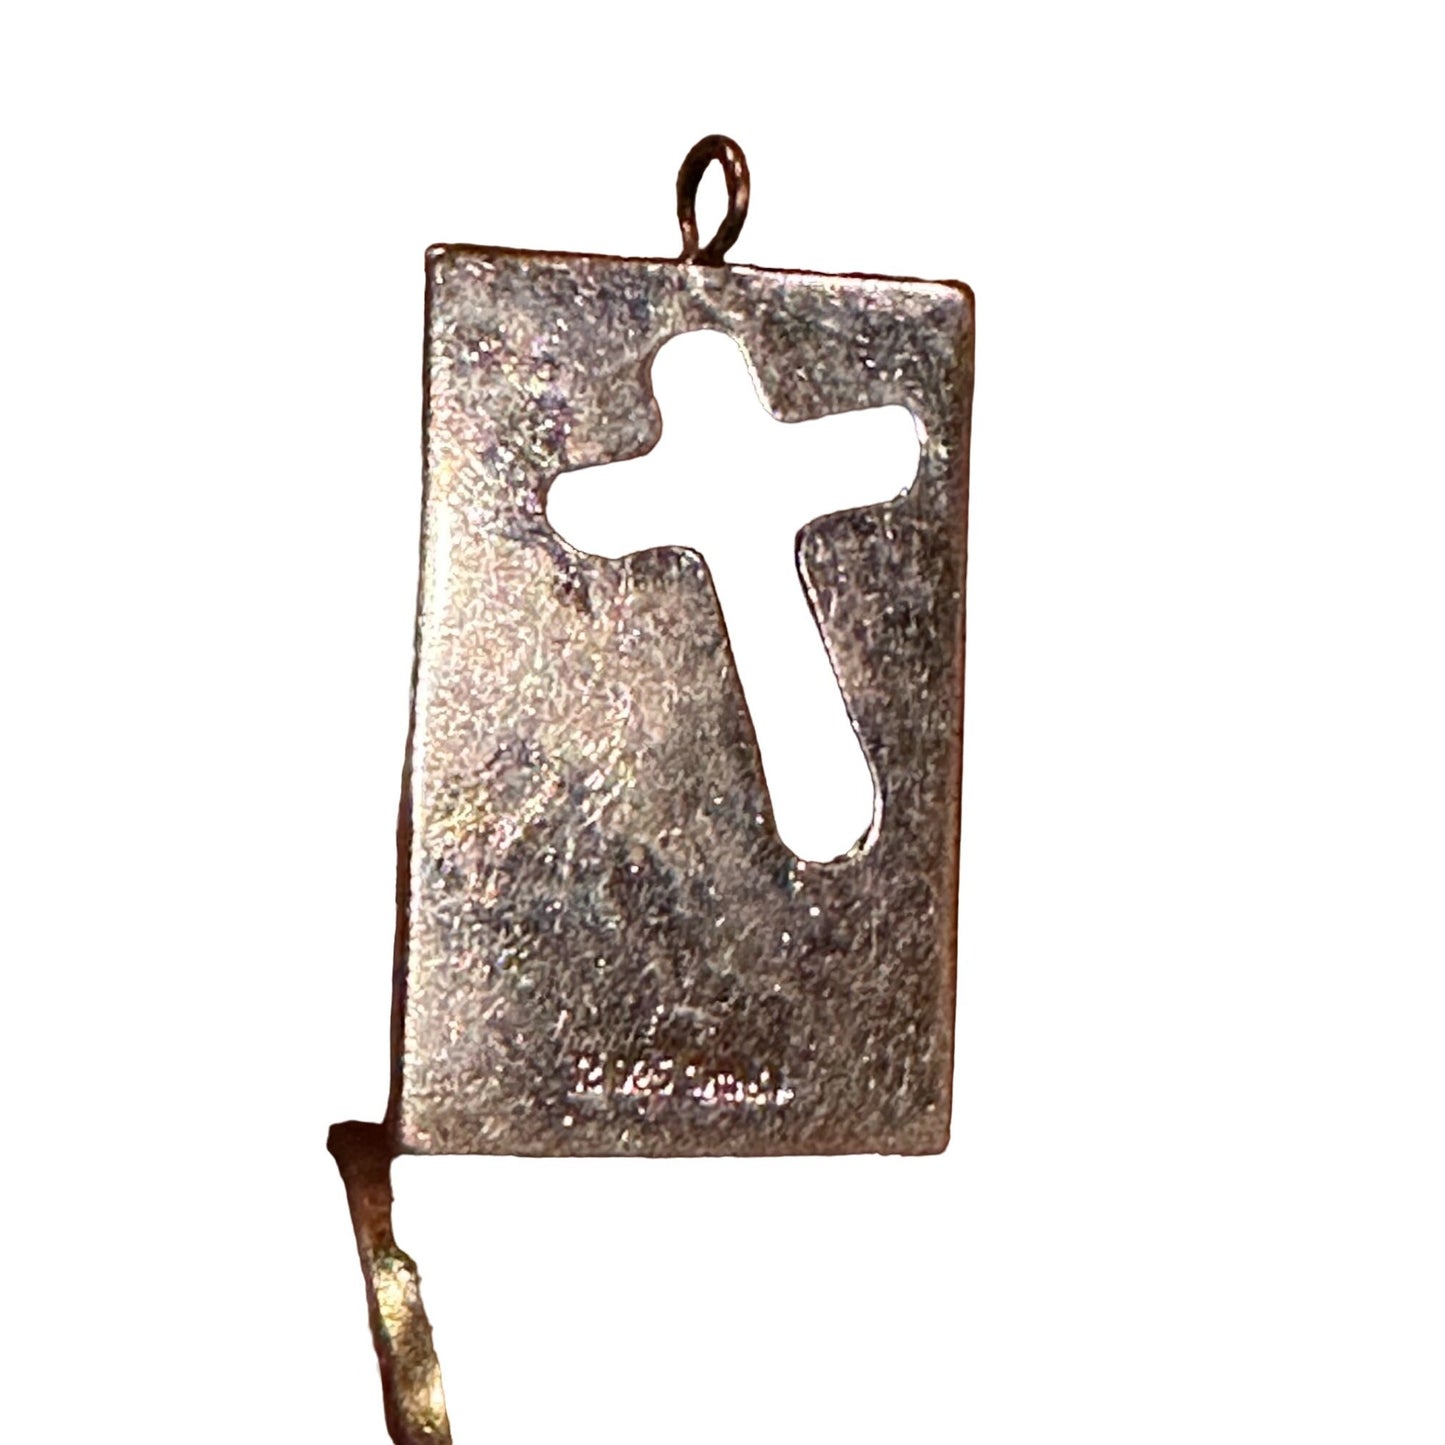 Sterling Silver 925 FAITH Cross Pendant Modern Design Made in China